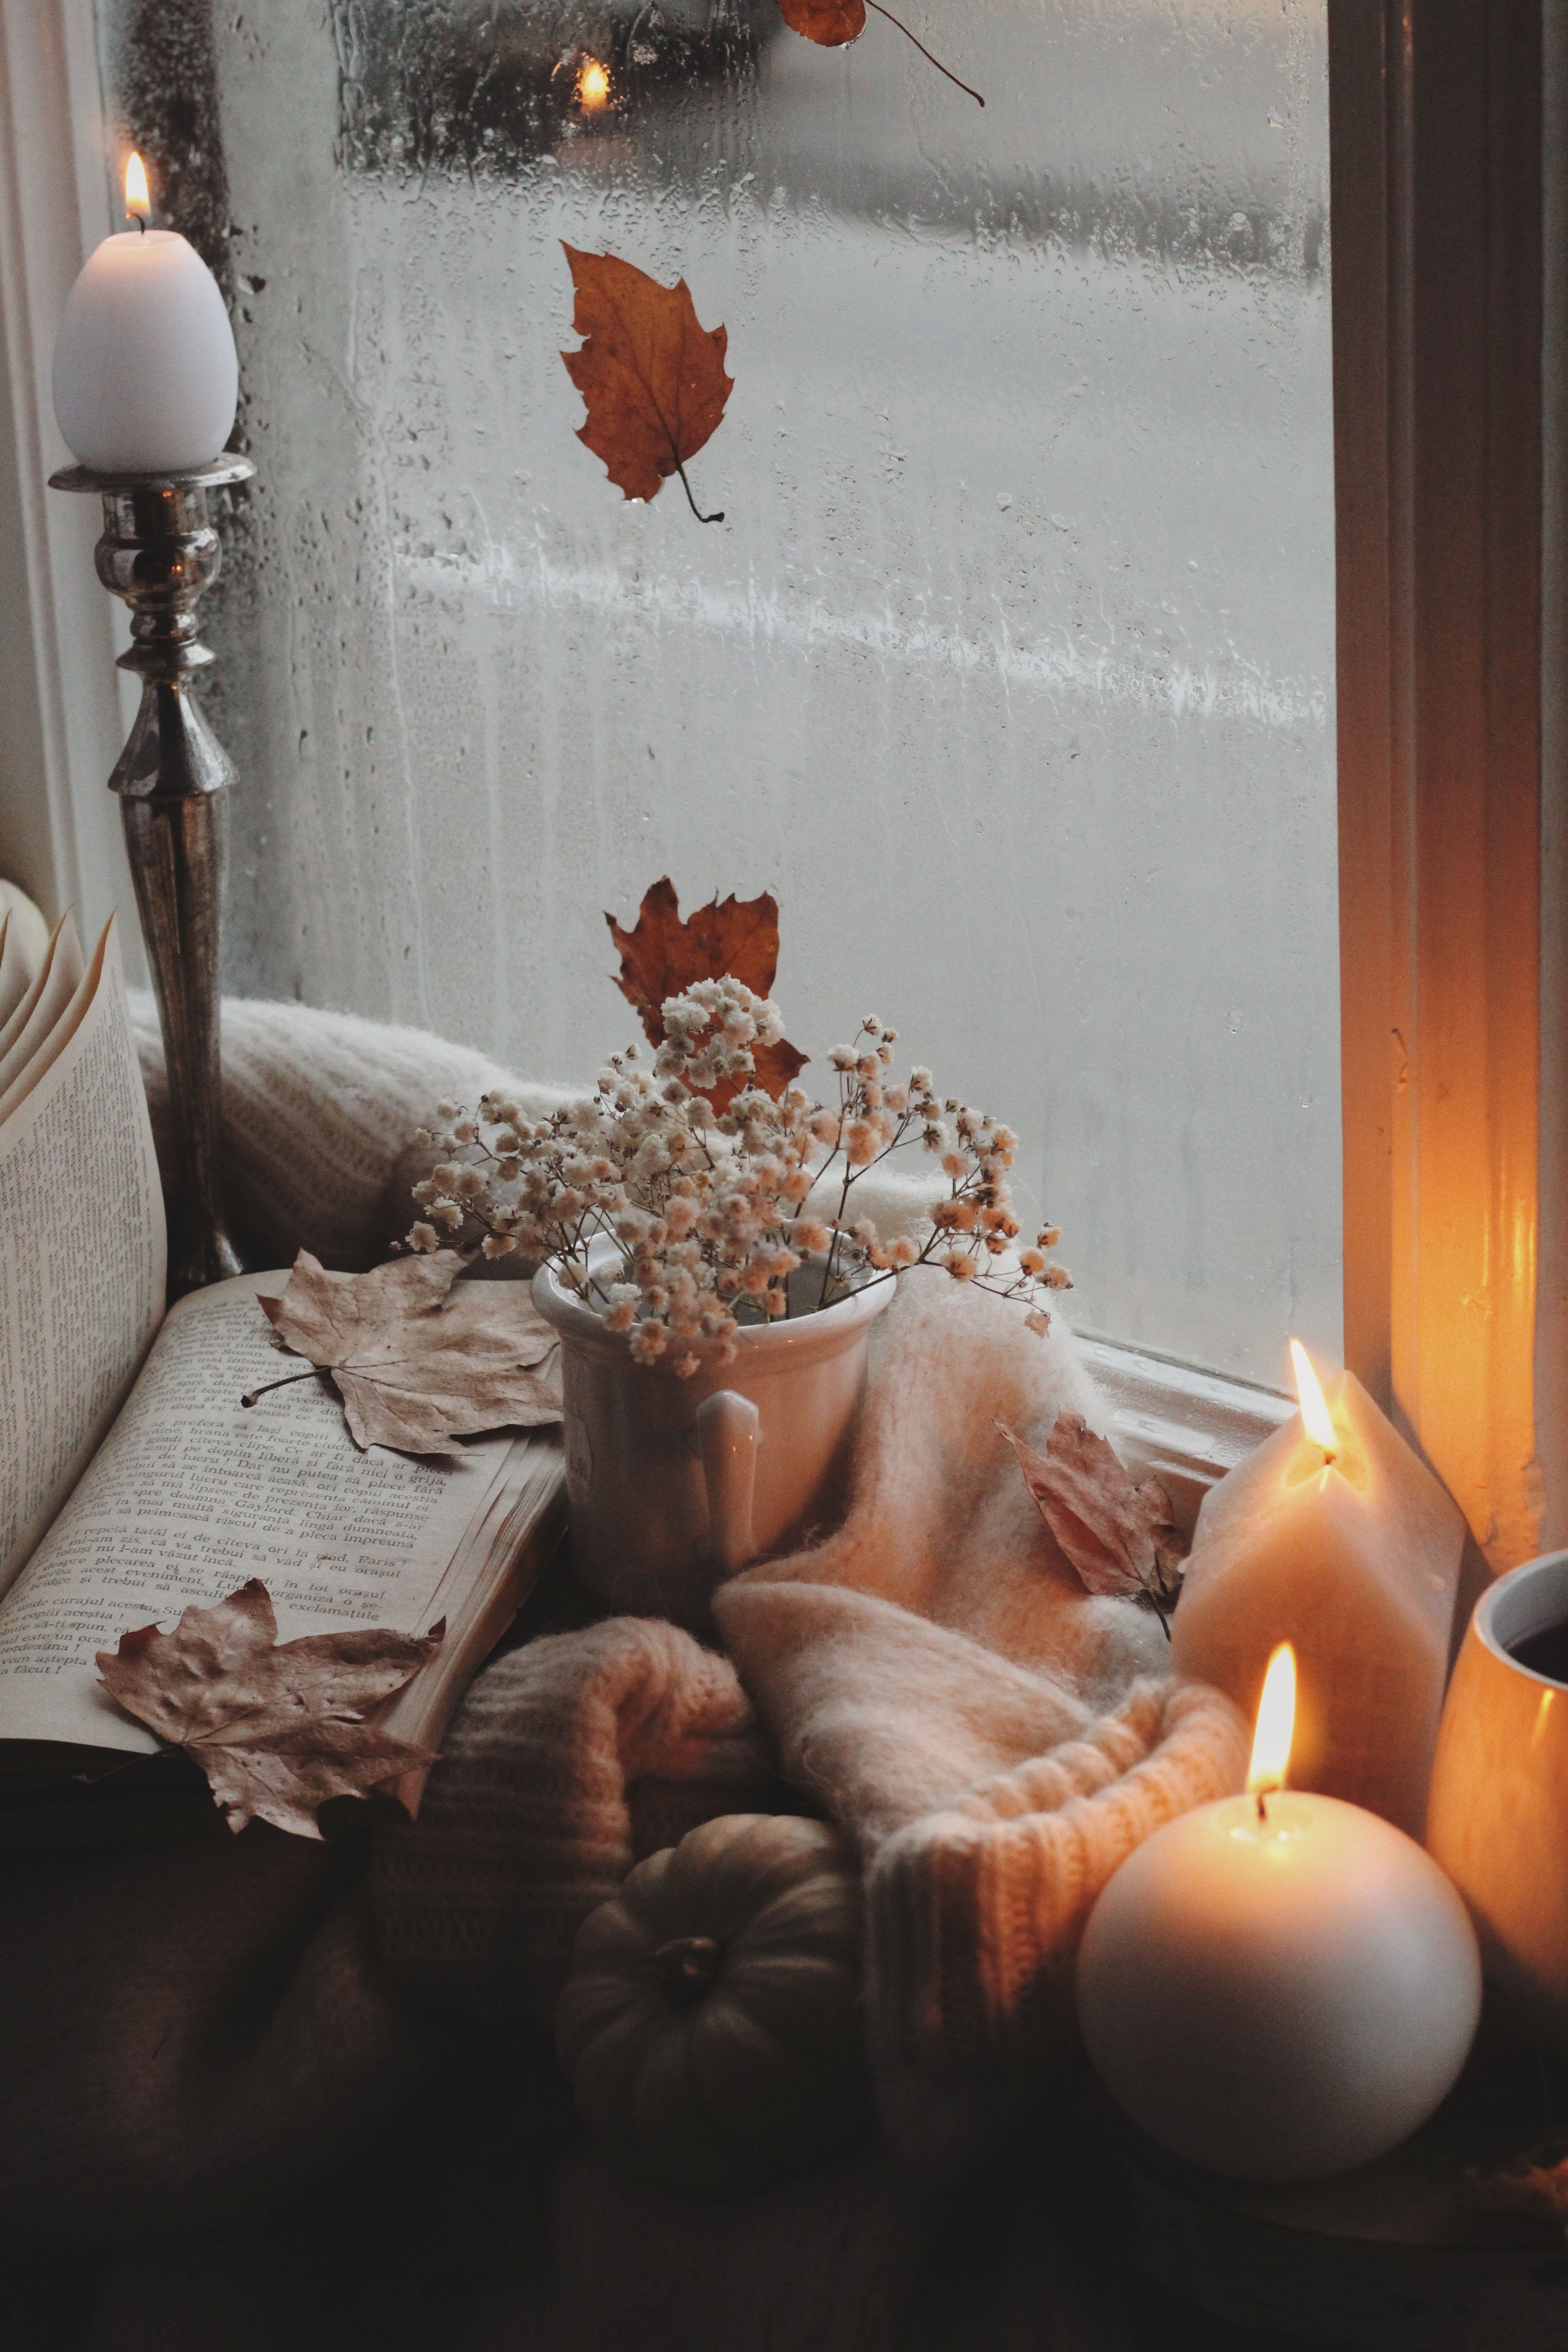 A window with candles and leaves in it - Cozy